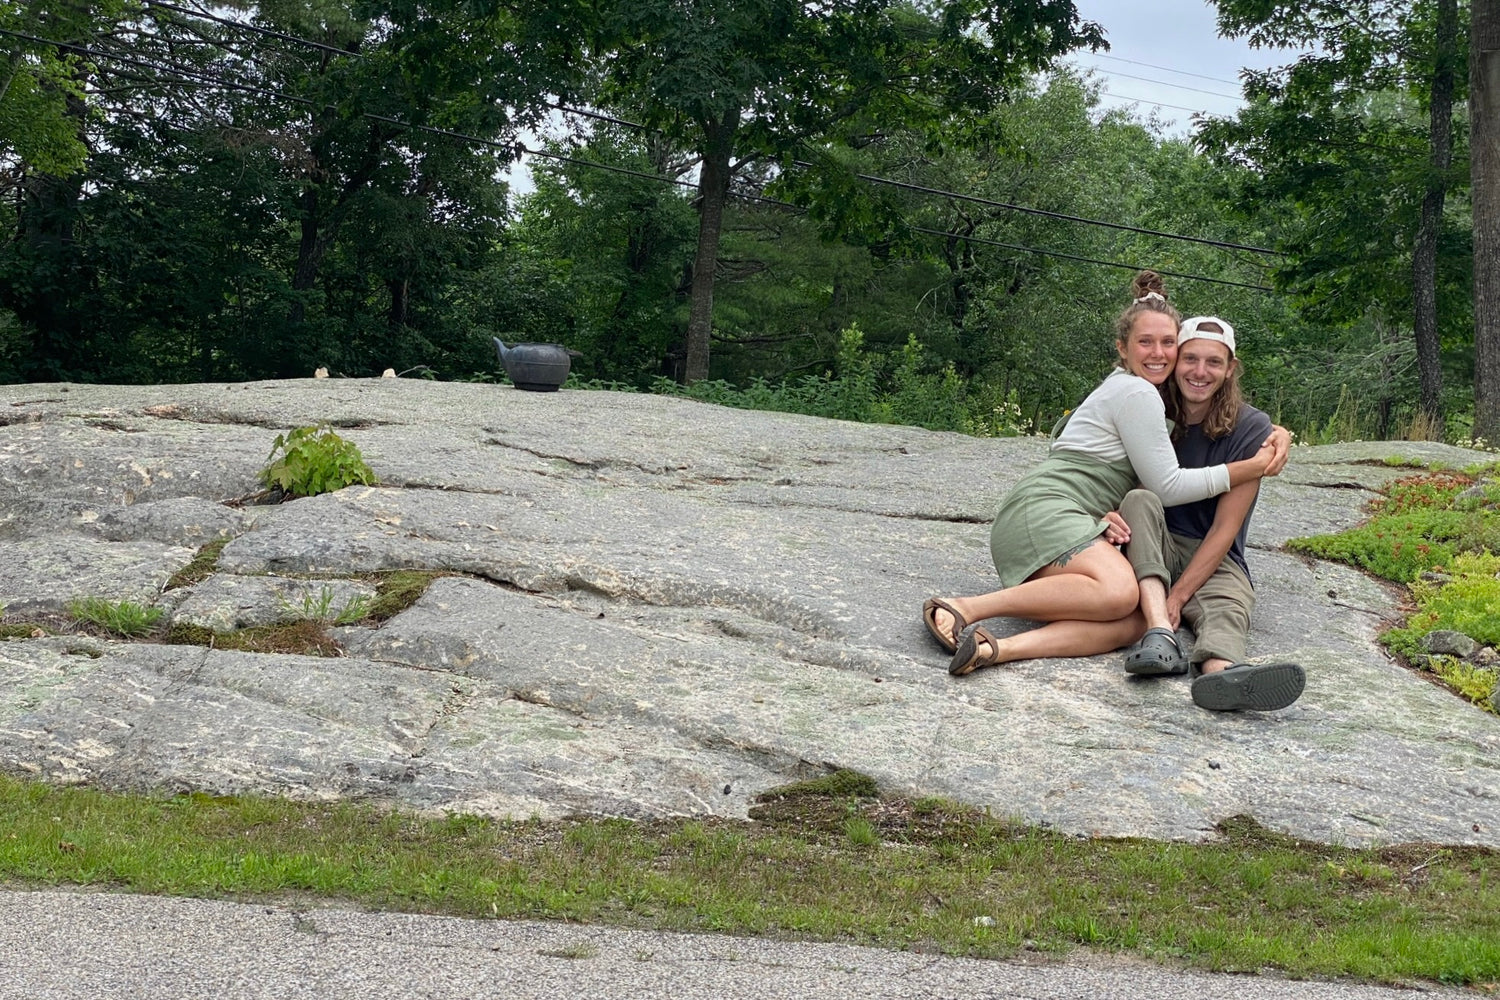 Joe and Jillian Hedglin, a young white couple, excitedly sit on a shallow rock ledge that lines the driveway to the workshop for Little Ledge Woodworks.